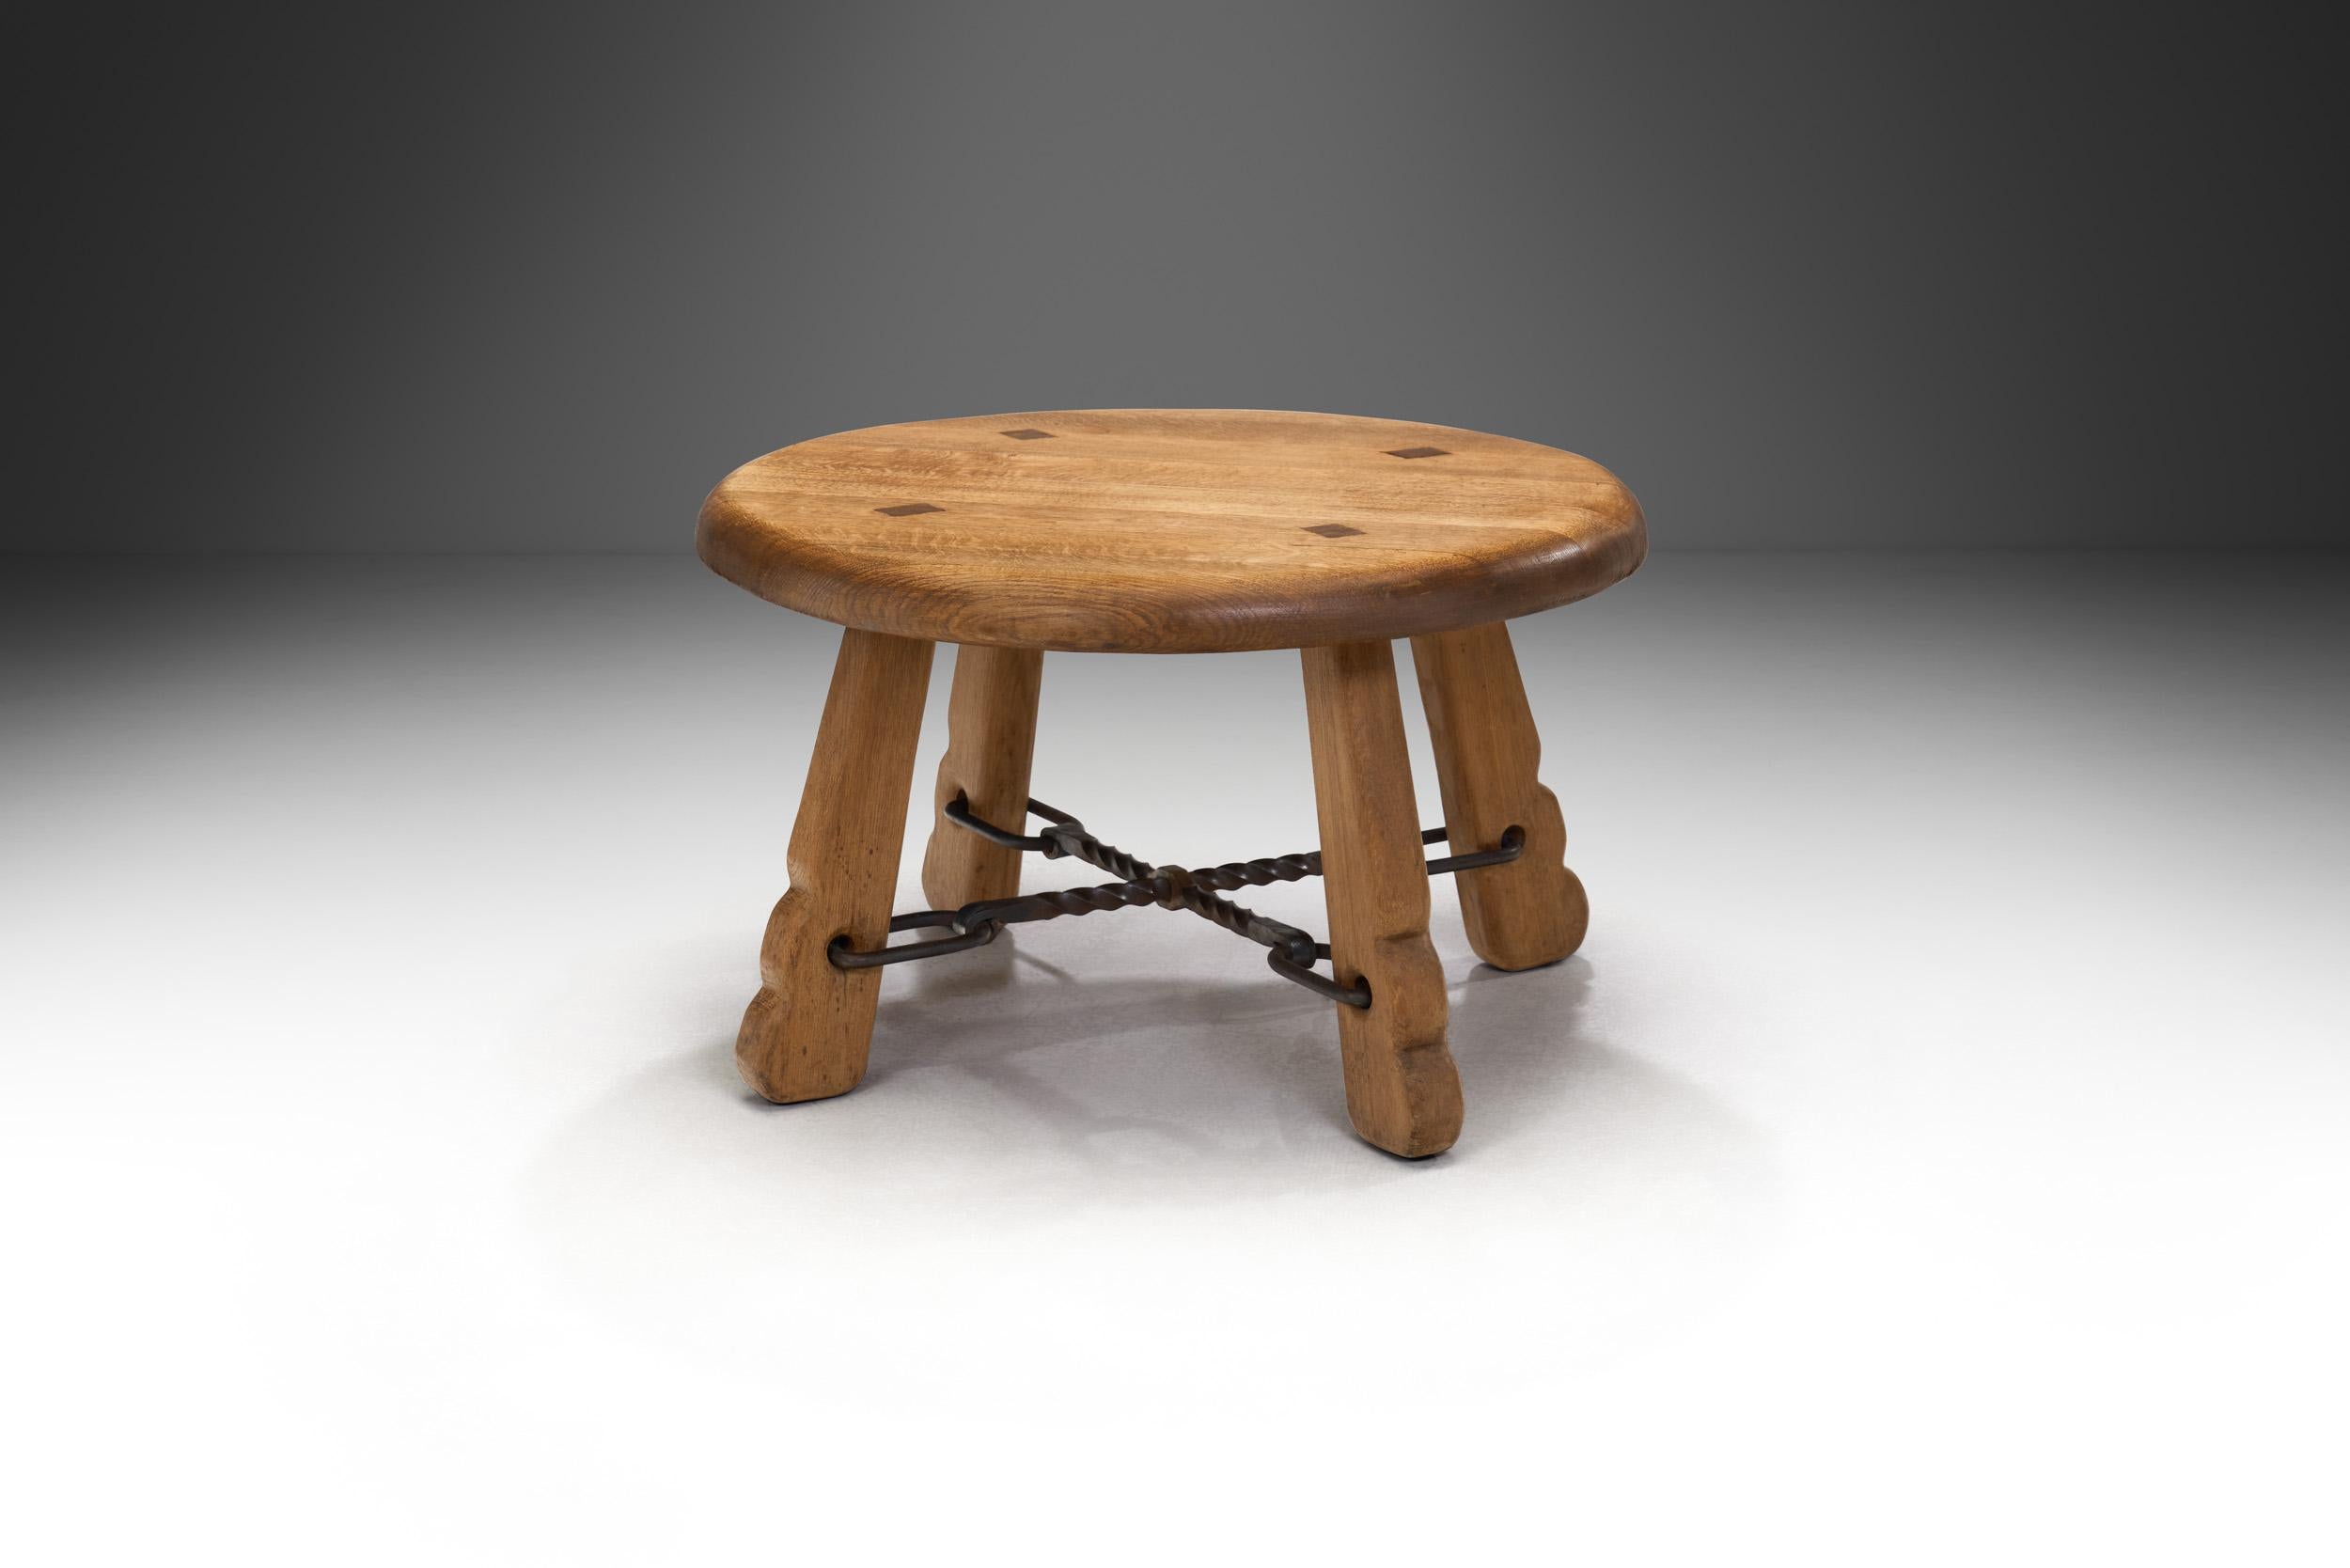 One of a kind design is a daring expression to use, especially in connection with 20th century design. However, it is difficult not to conjure up the expression in the case of this solid oak table.

In a rather distinctive way, softness and